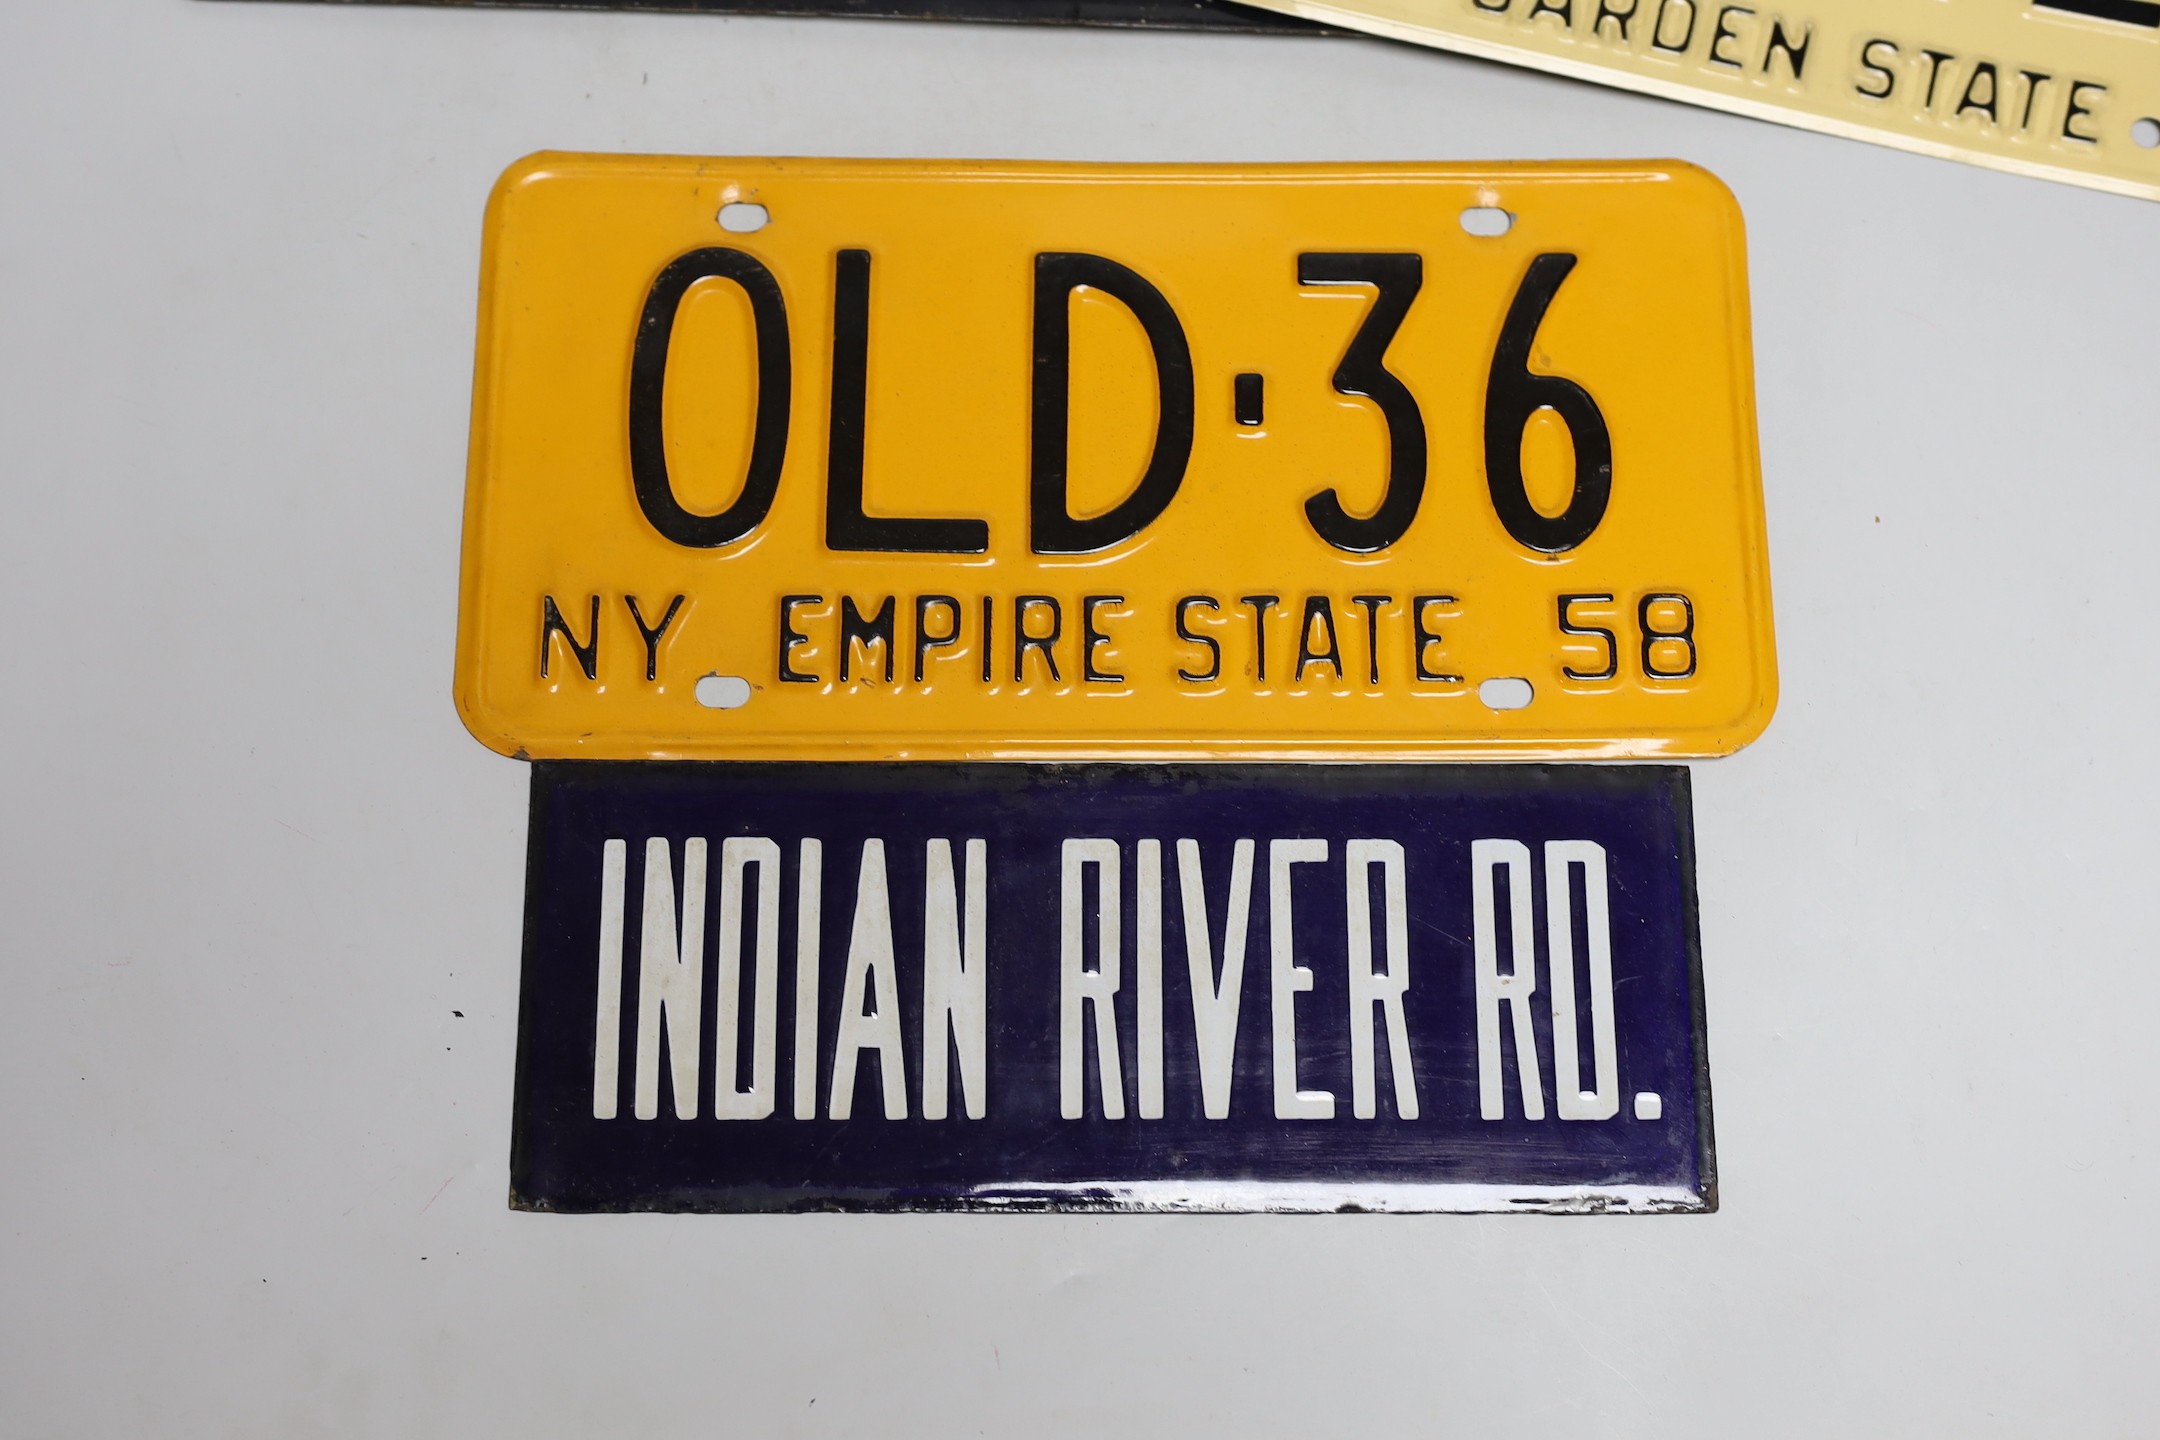 A mixed group of nine USA enamel car registration number plates